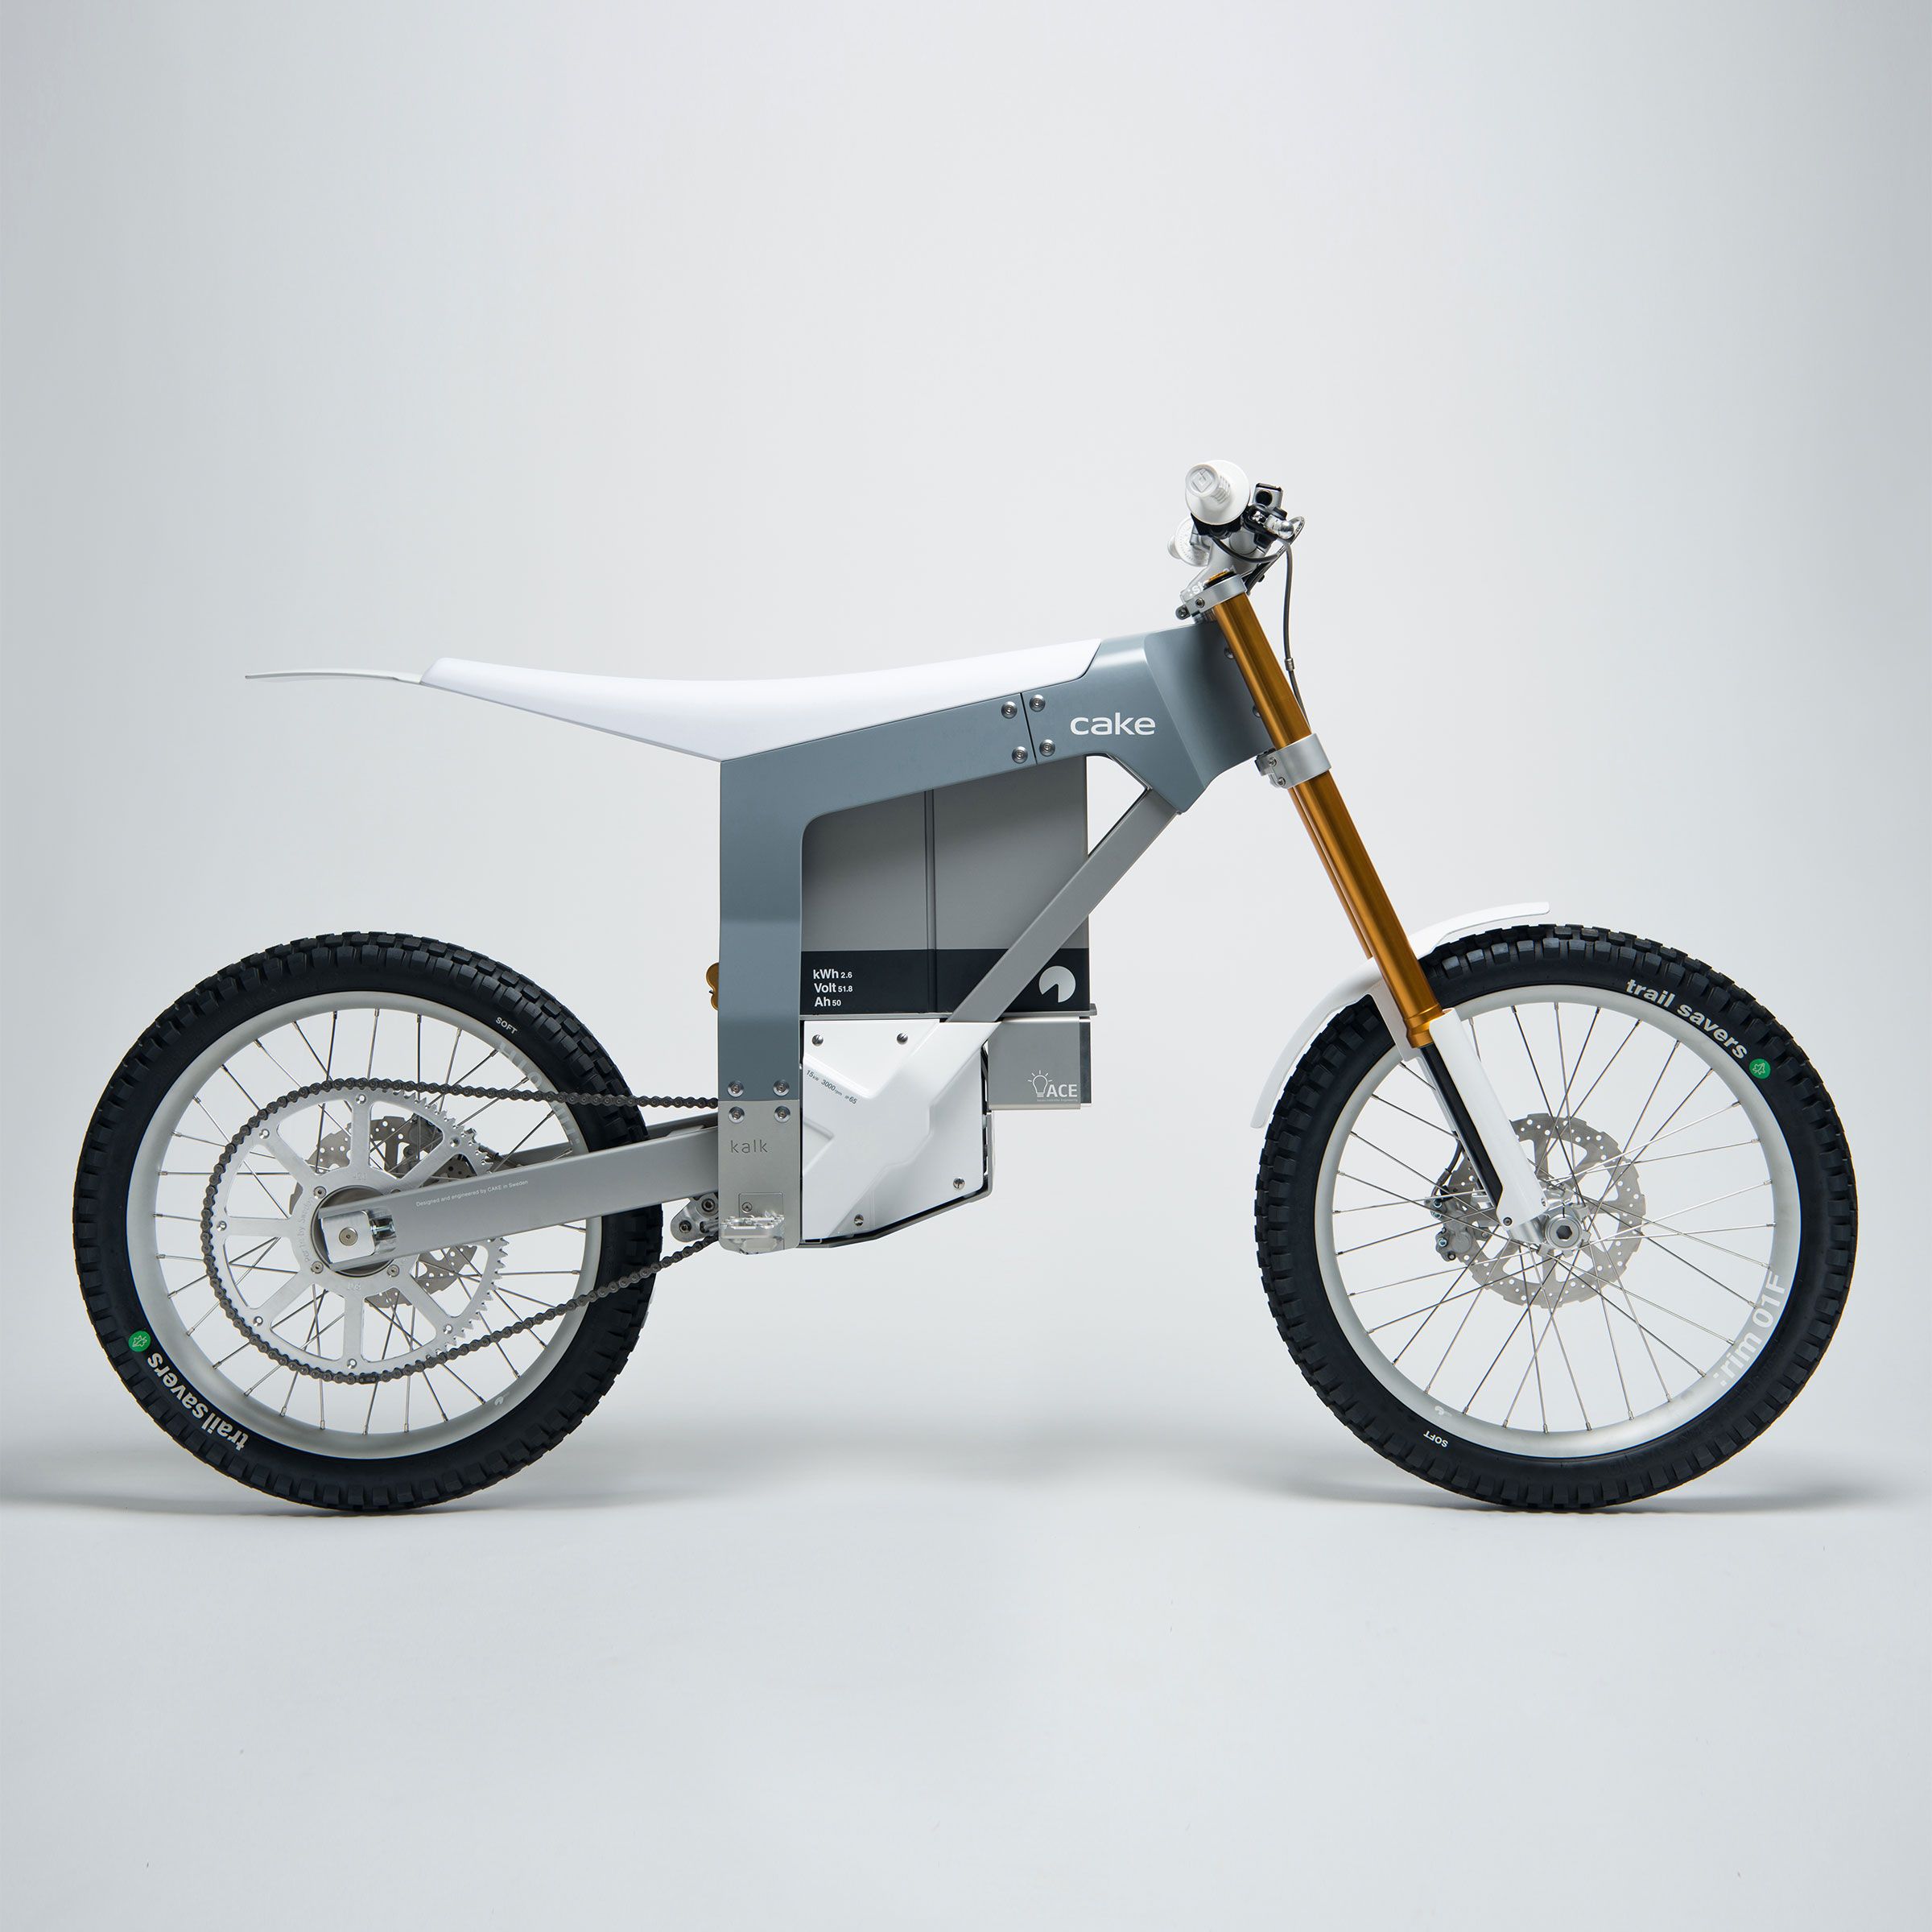 2018 CAKE is giving us the KALK. An electric dirt bike